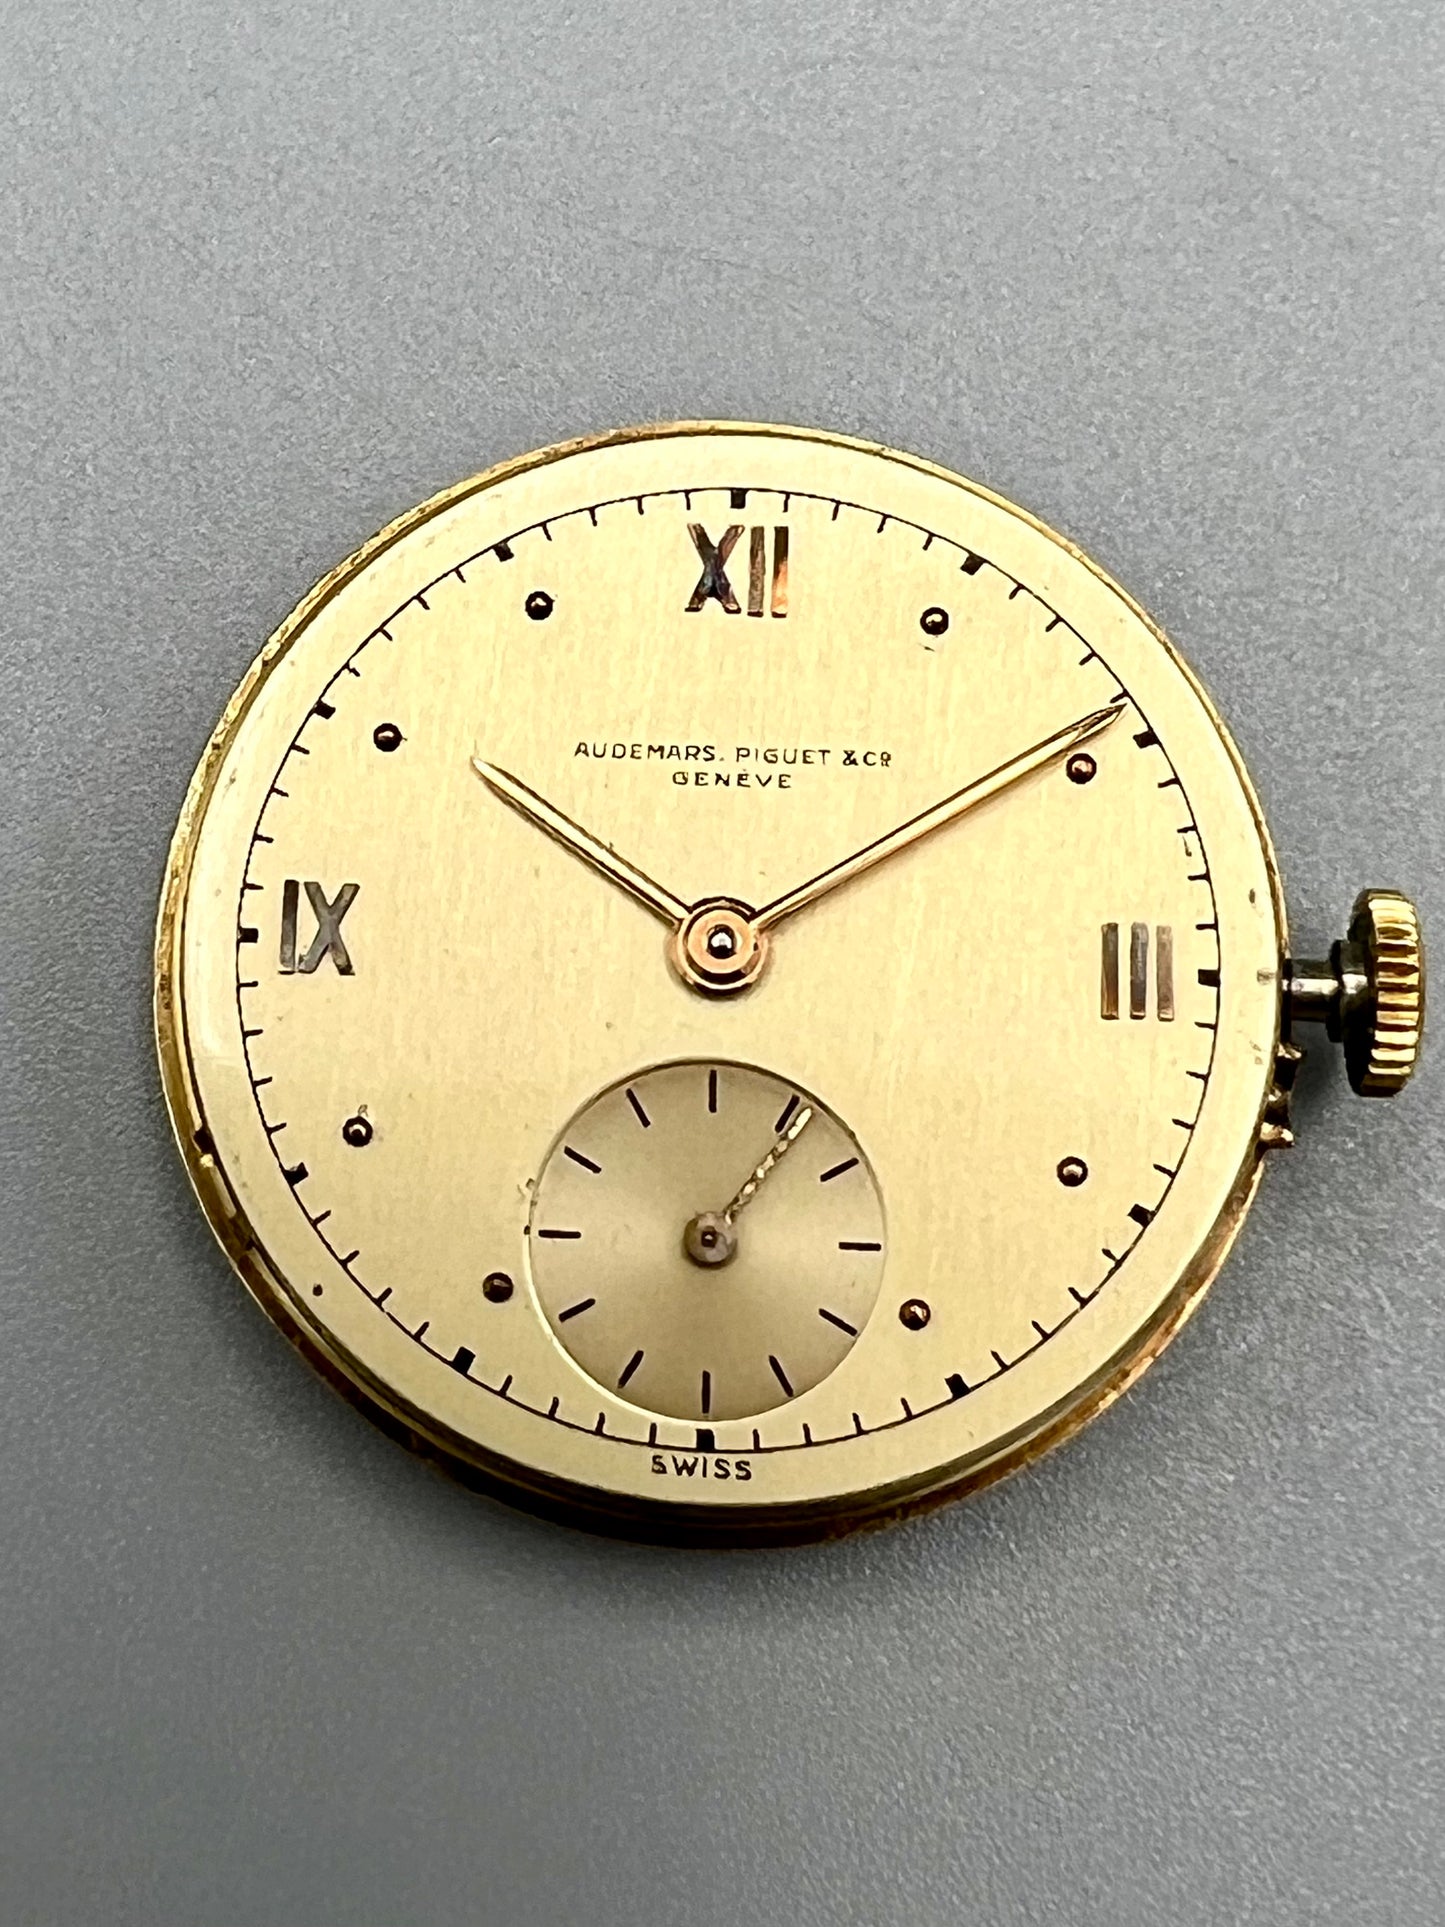 Audemars Piguet Extremely Rare and Very Special Manual Wind Cal. VZSS, Serial Number 51960, Early 1940s